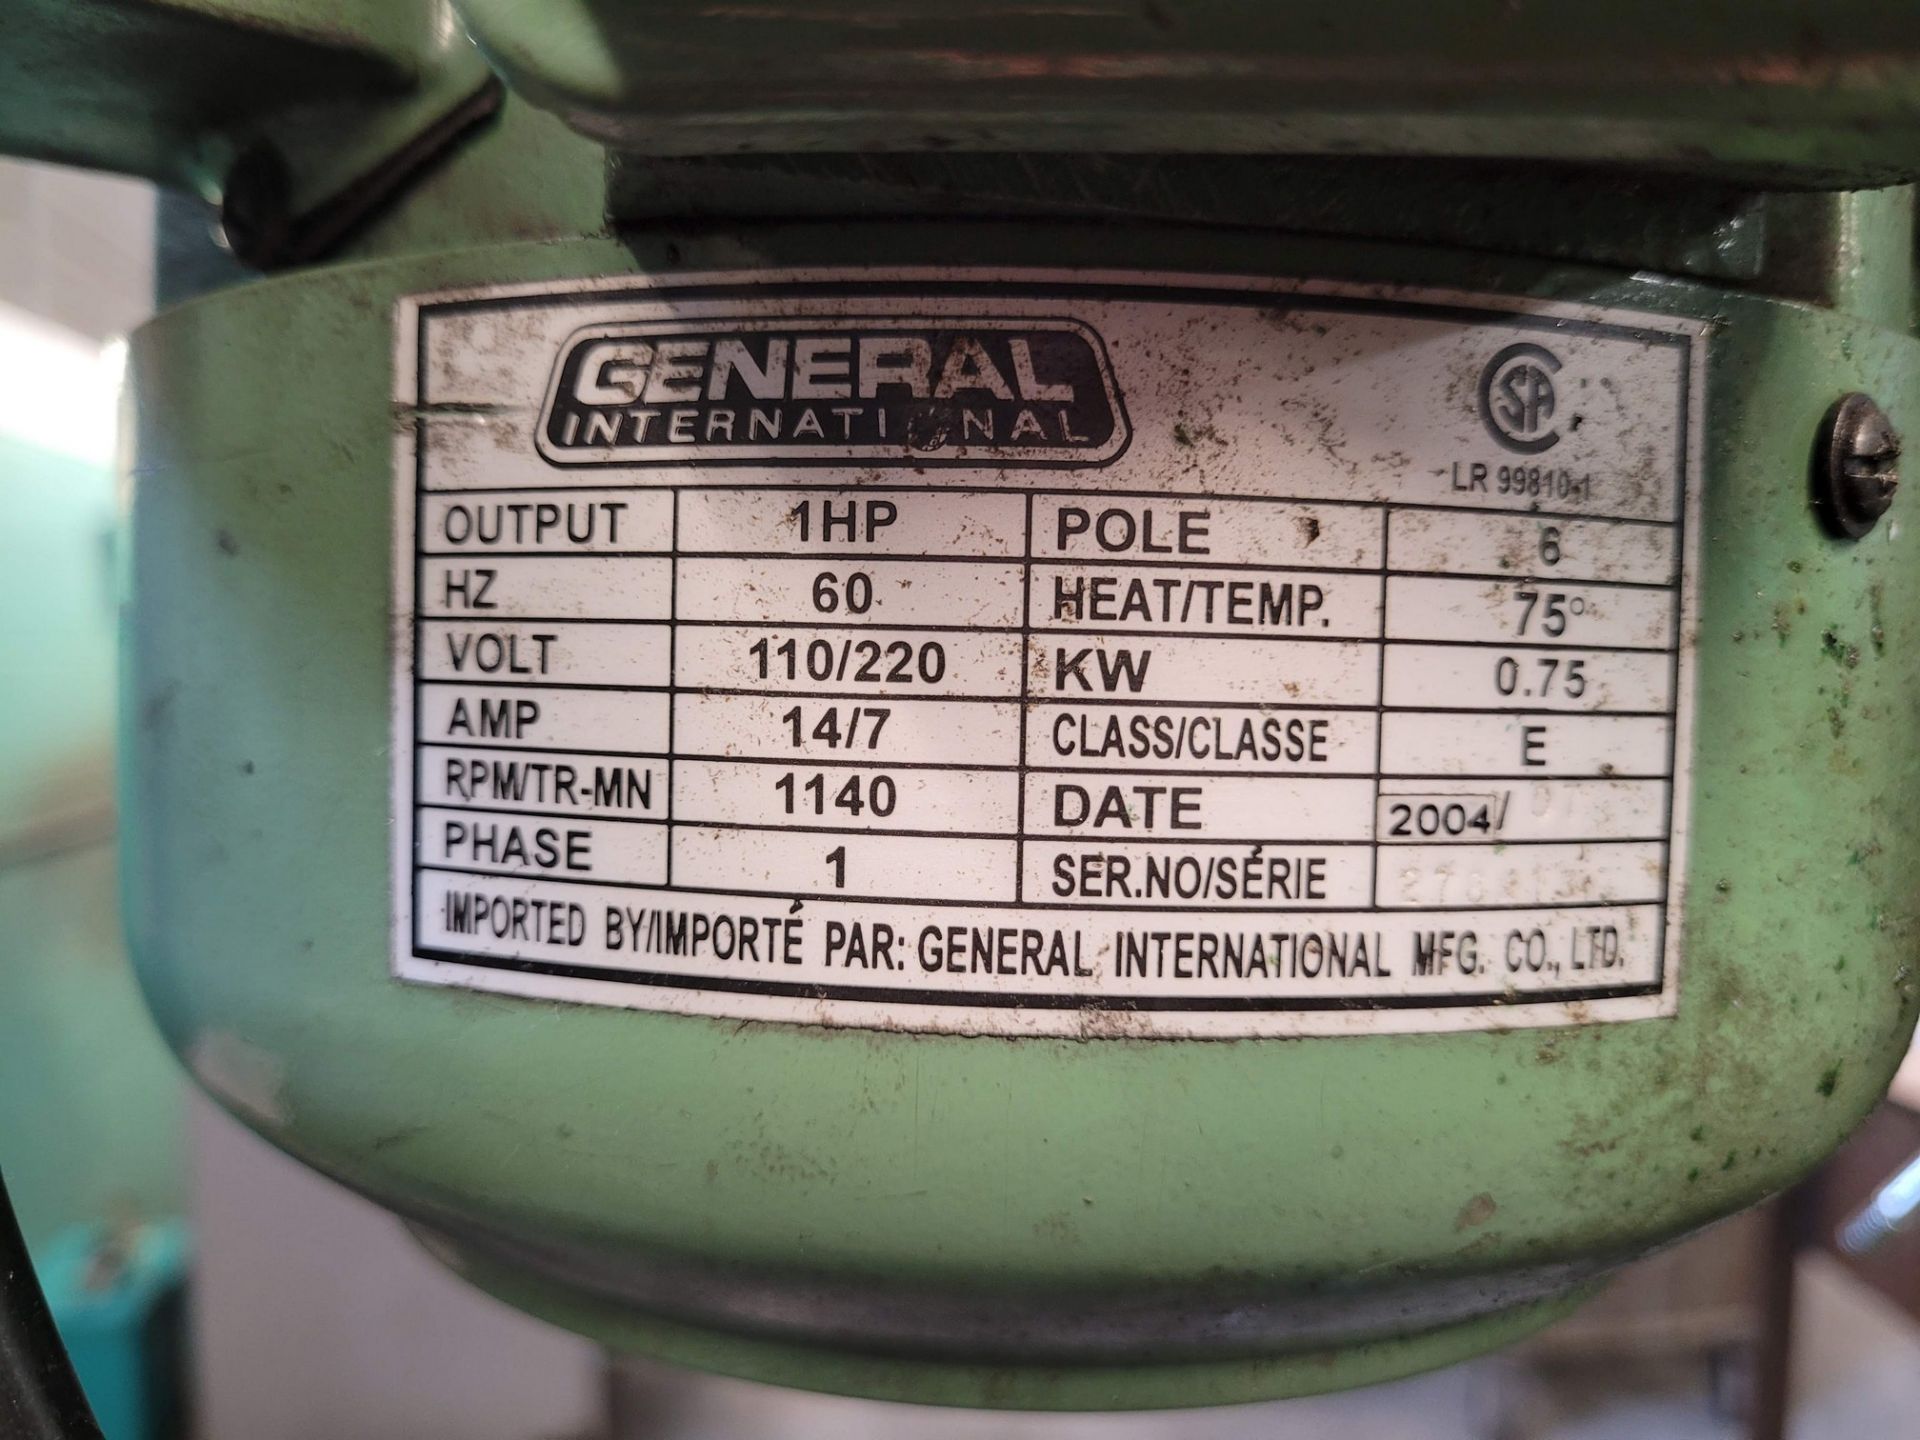 2004 GENERAL INTERNATIONAL VARIABLE SPEED DRILL PRESS, S/N 276113 (RIGGING FEE $50) - Image 3 of 4